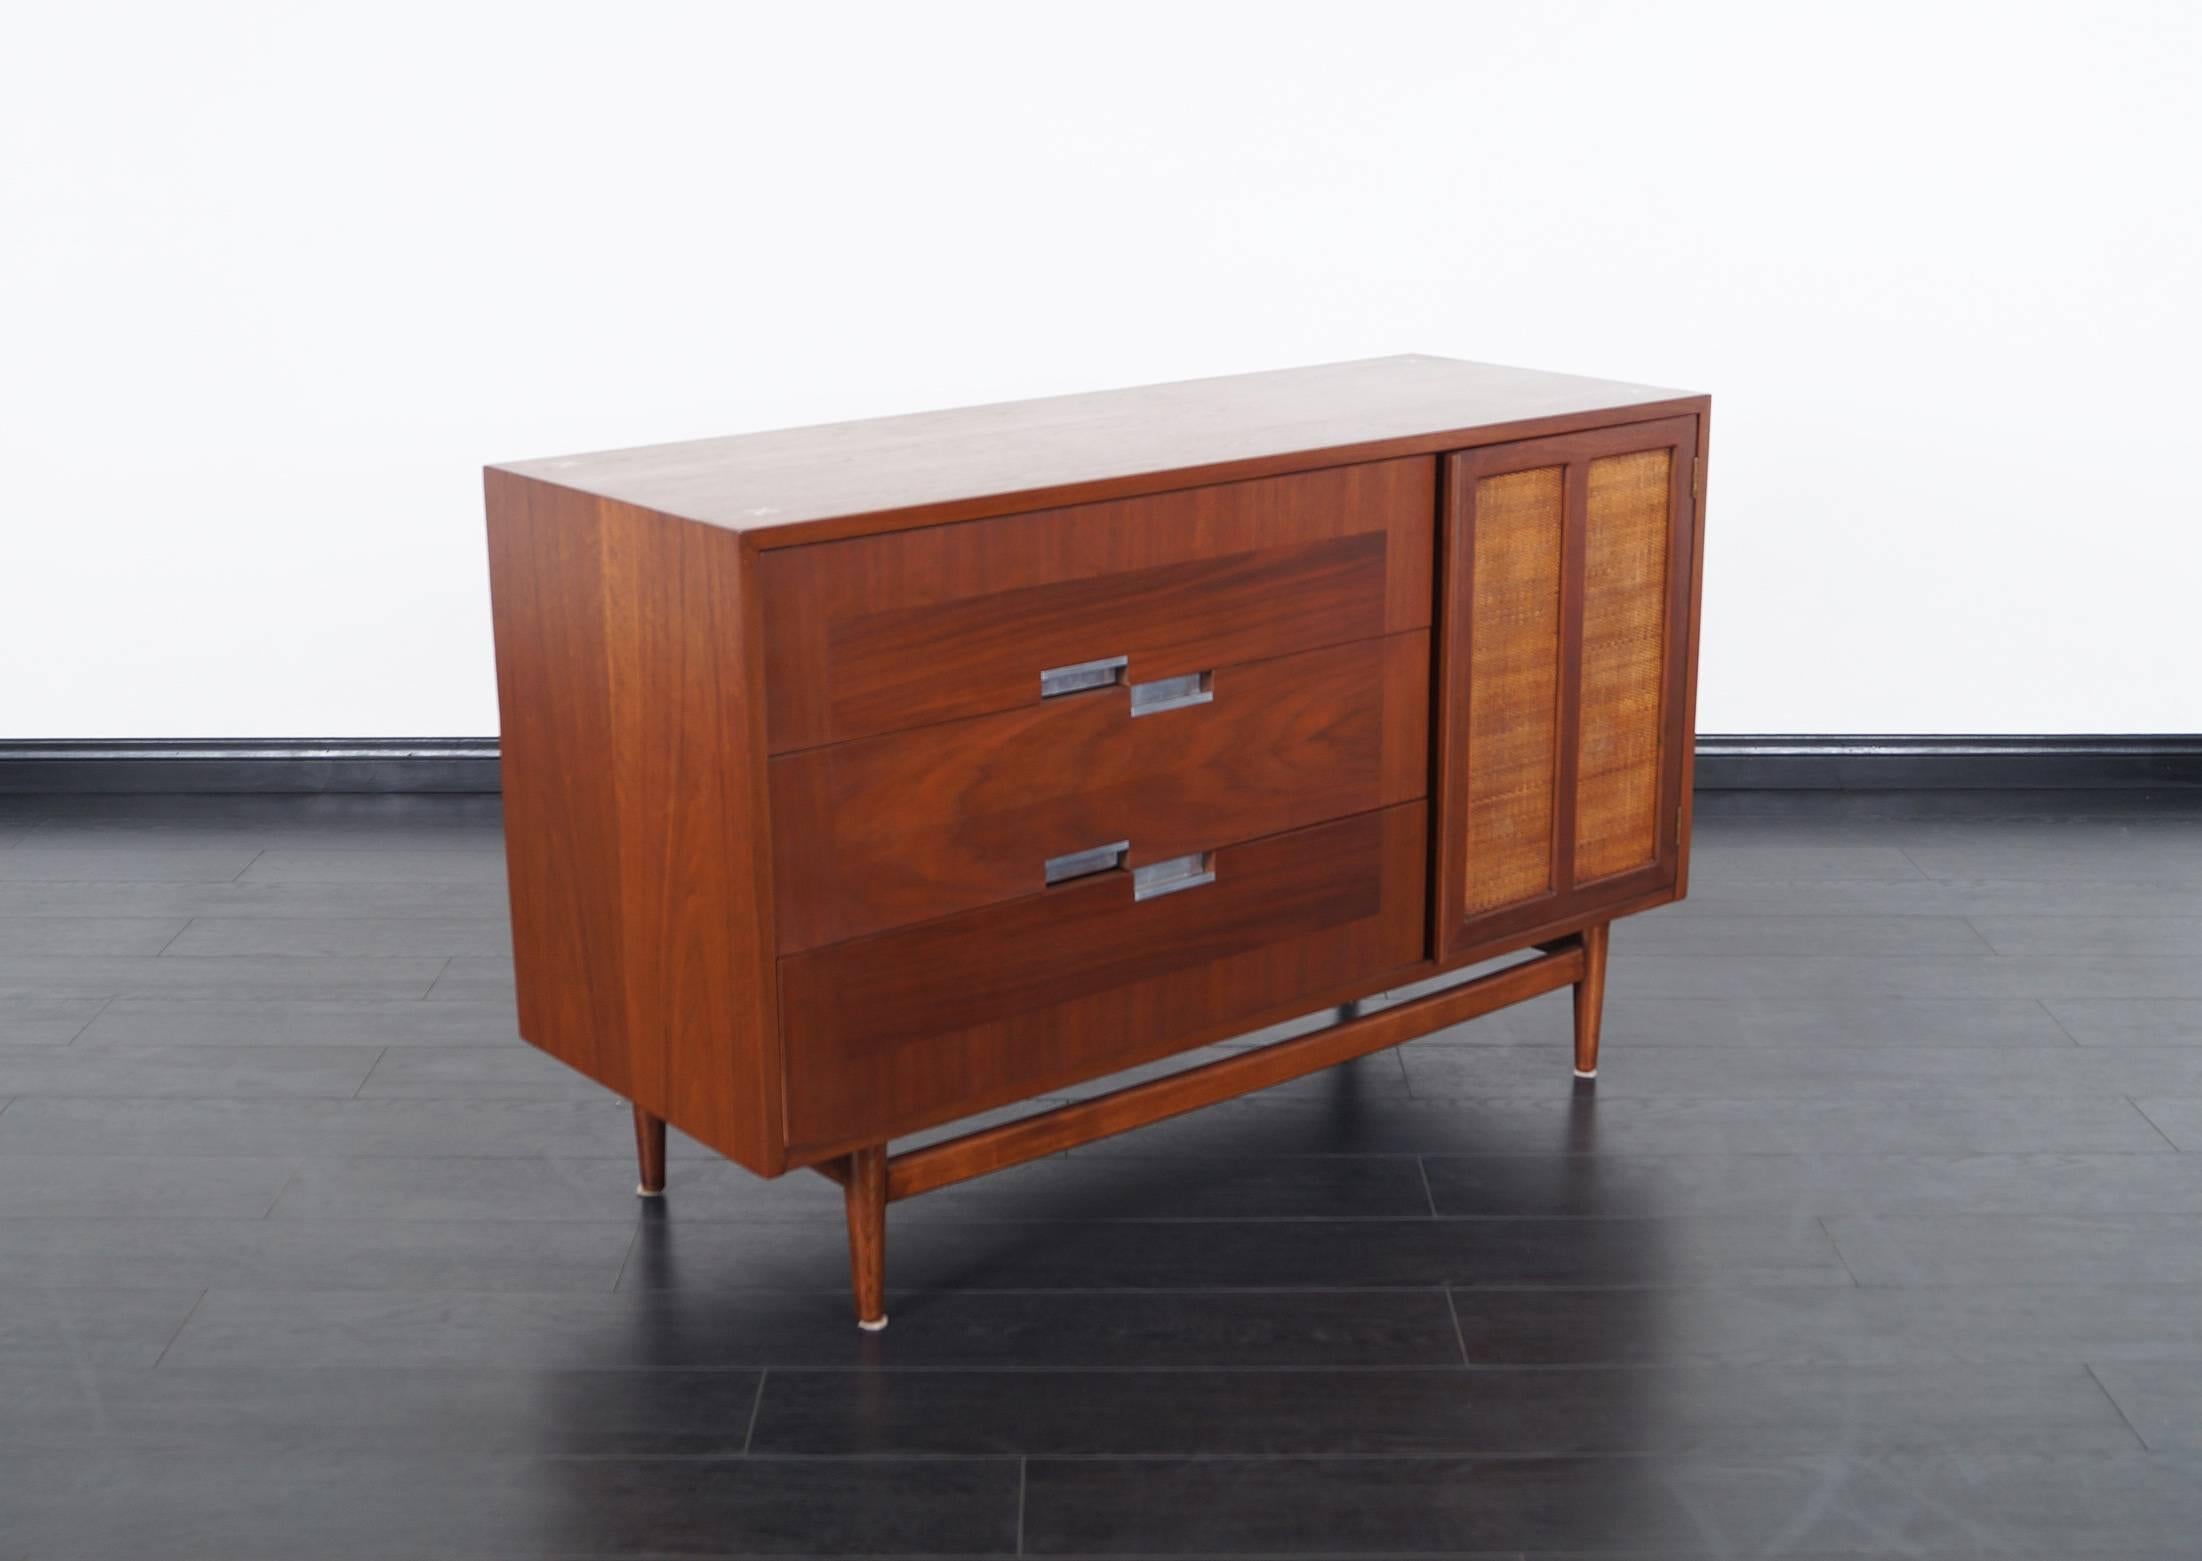 Vintage walnut credenza by American of Martinsville. Features three dovetail drawers, with one shelf behind cane door.